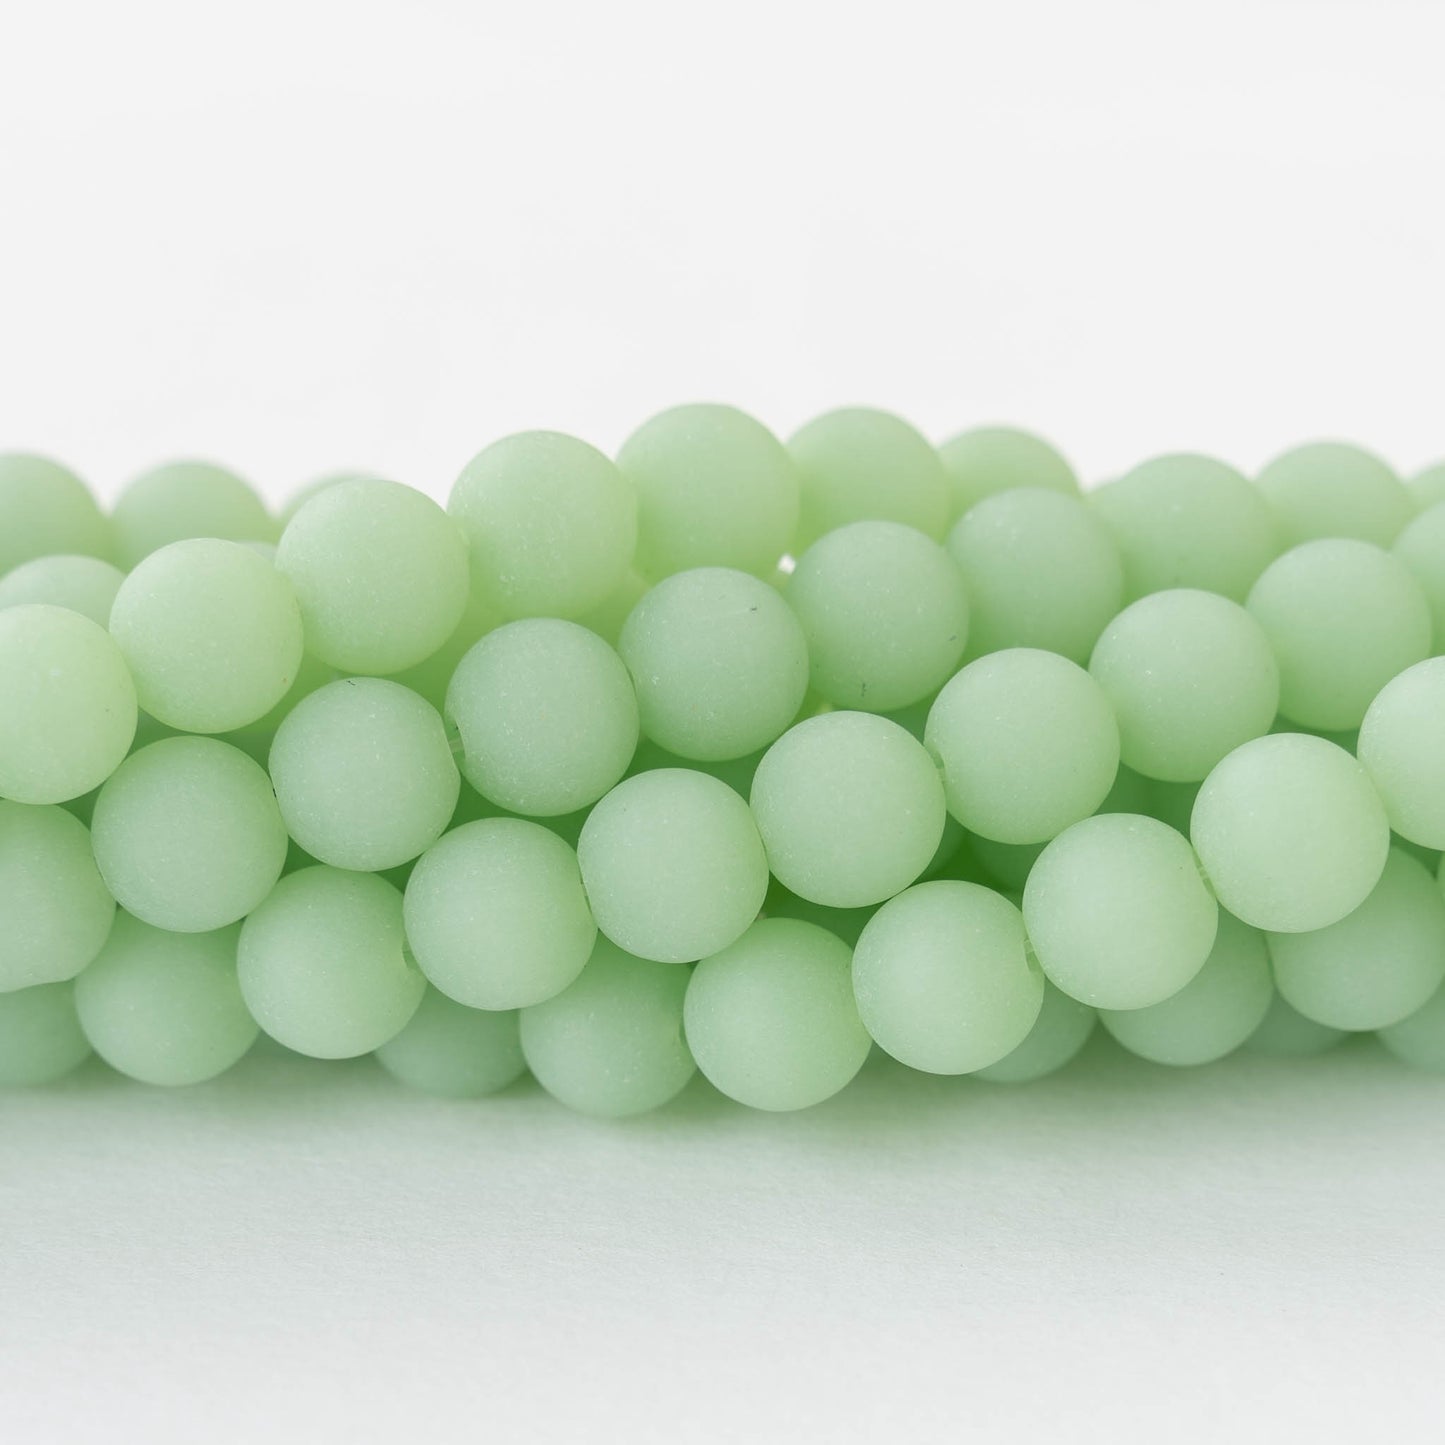 10mm Frosted Glass Rounds - Opaque Celadon Green - 21 beads